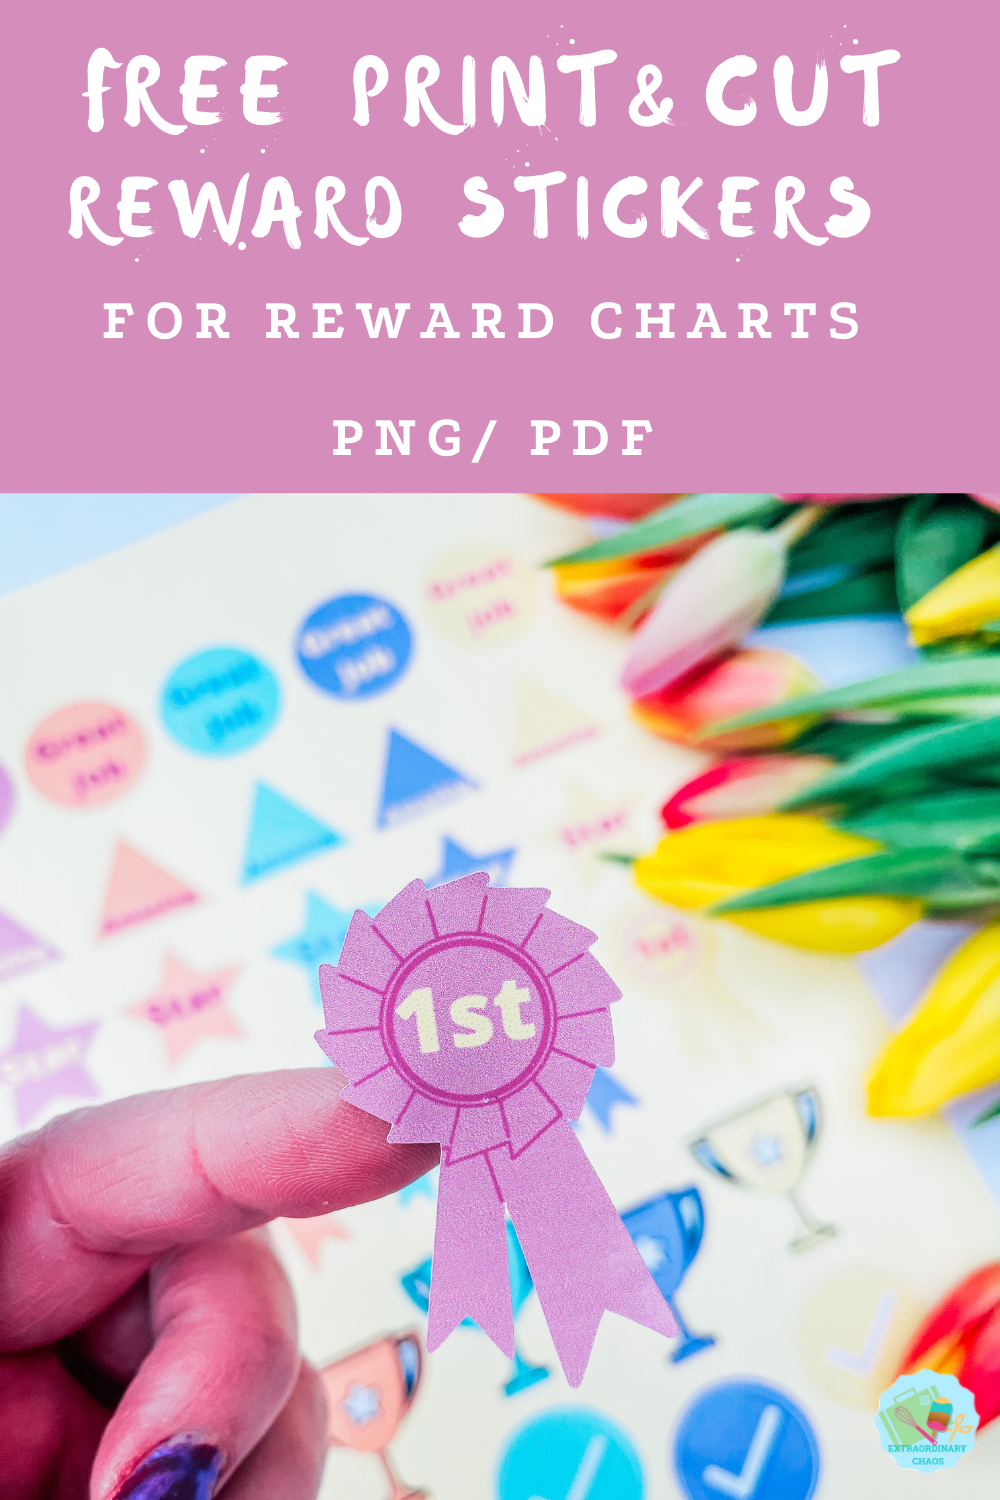 Free printable reward stickers for reward charts, home school  and crafting with kids